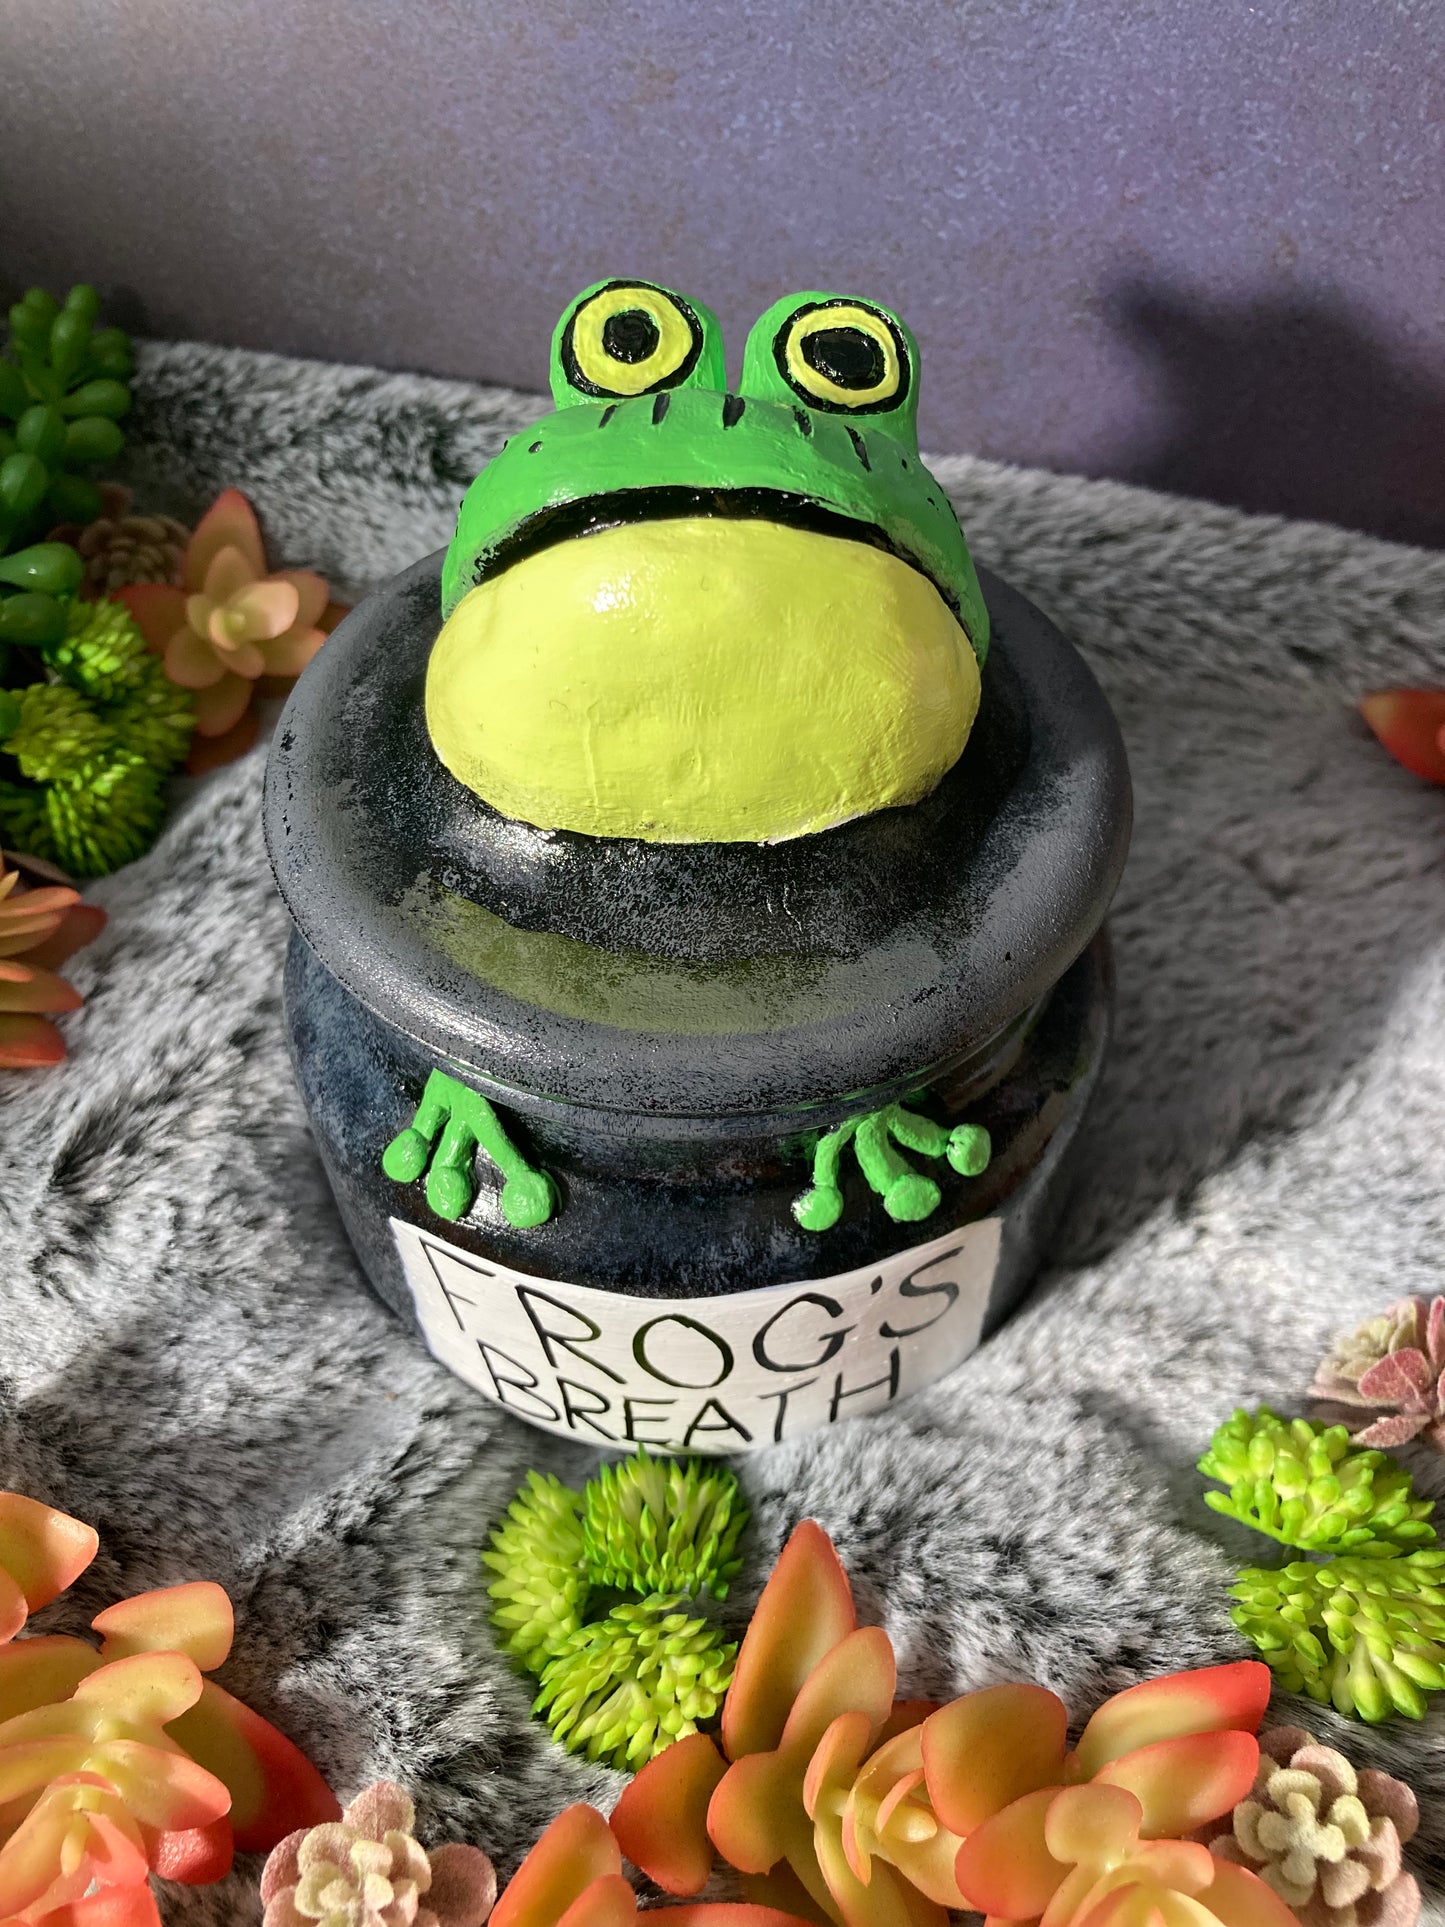 Frogs Breath candle